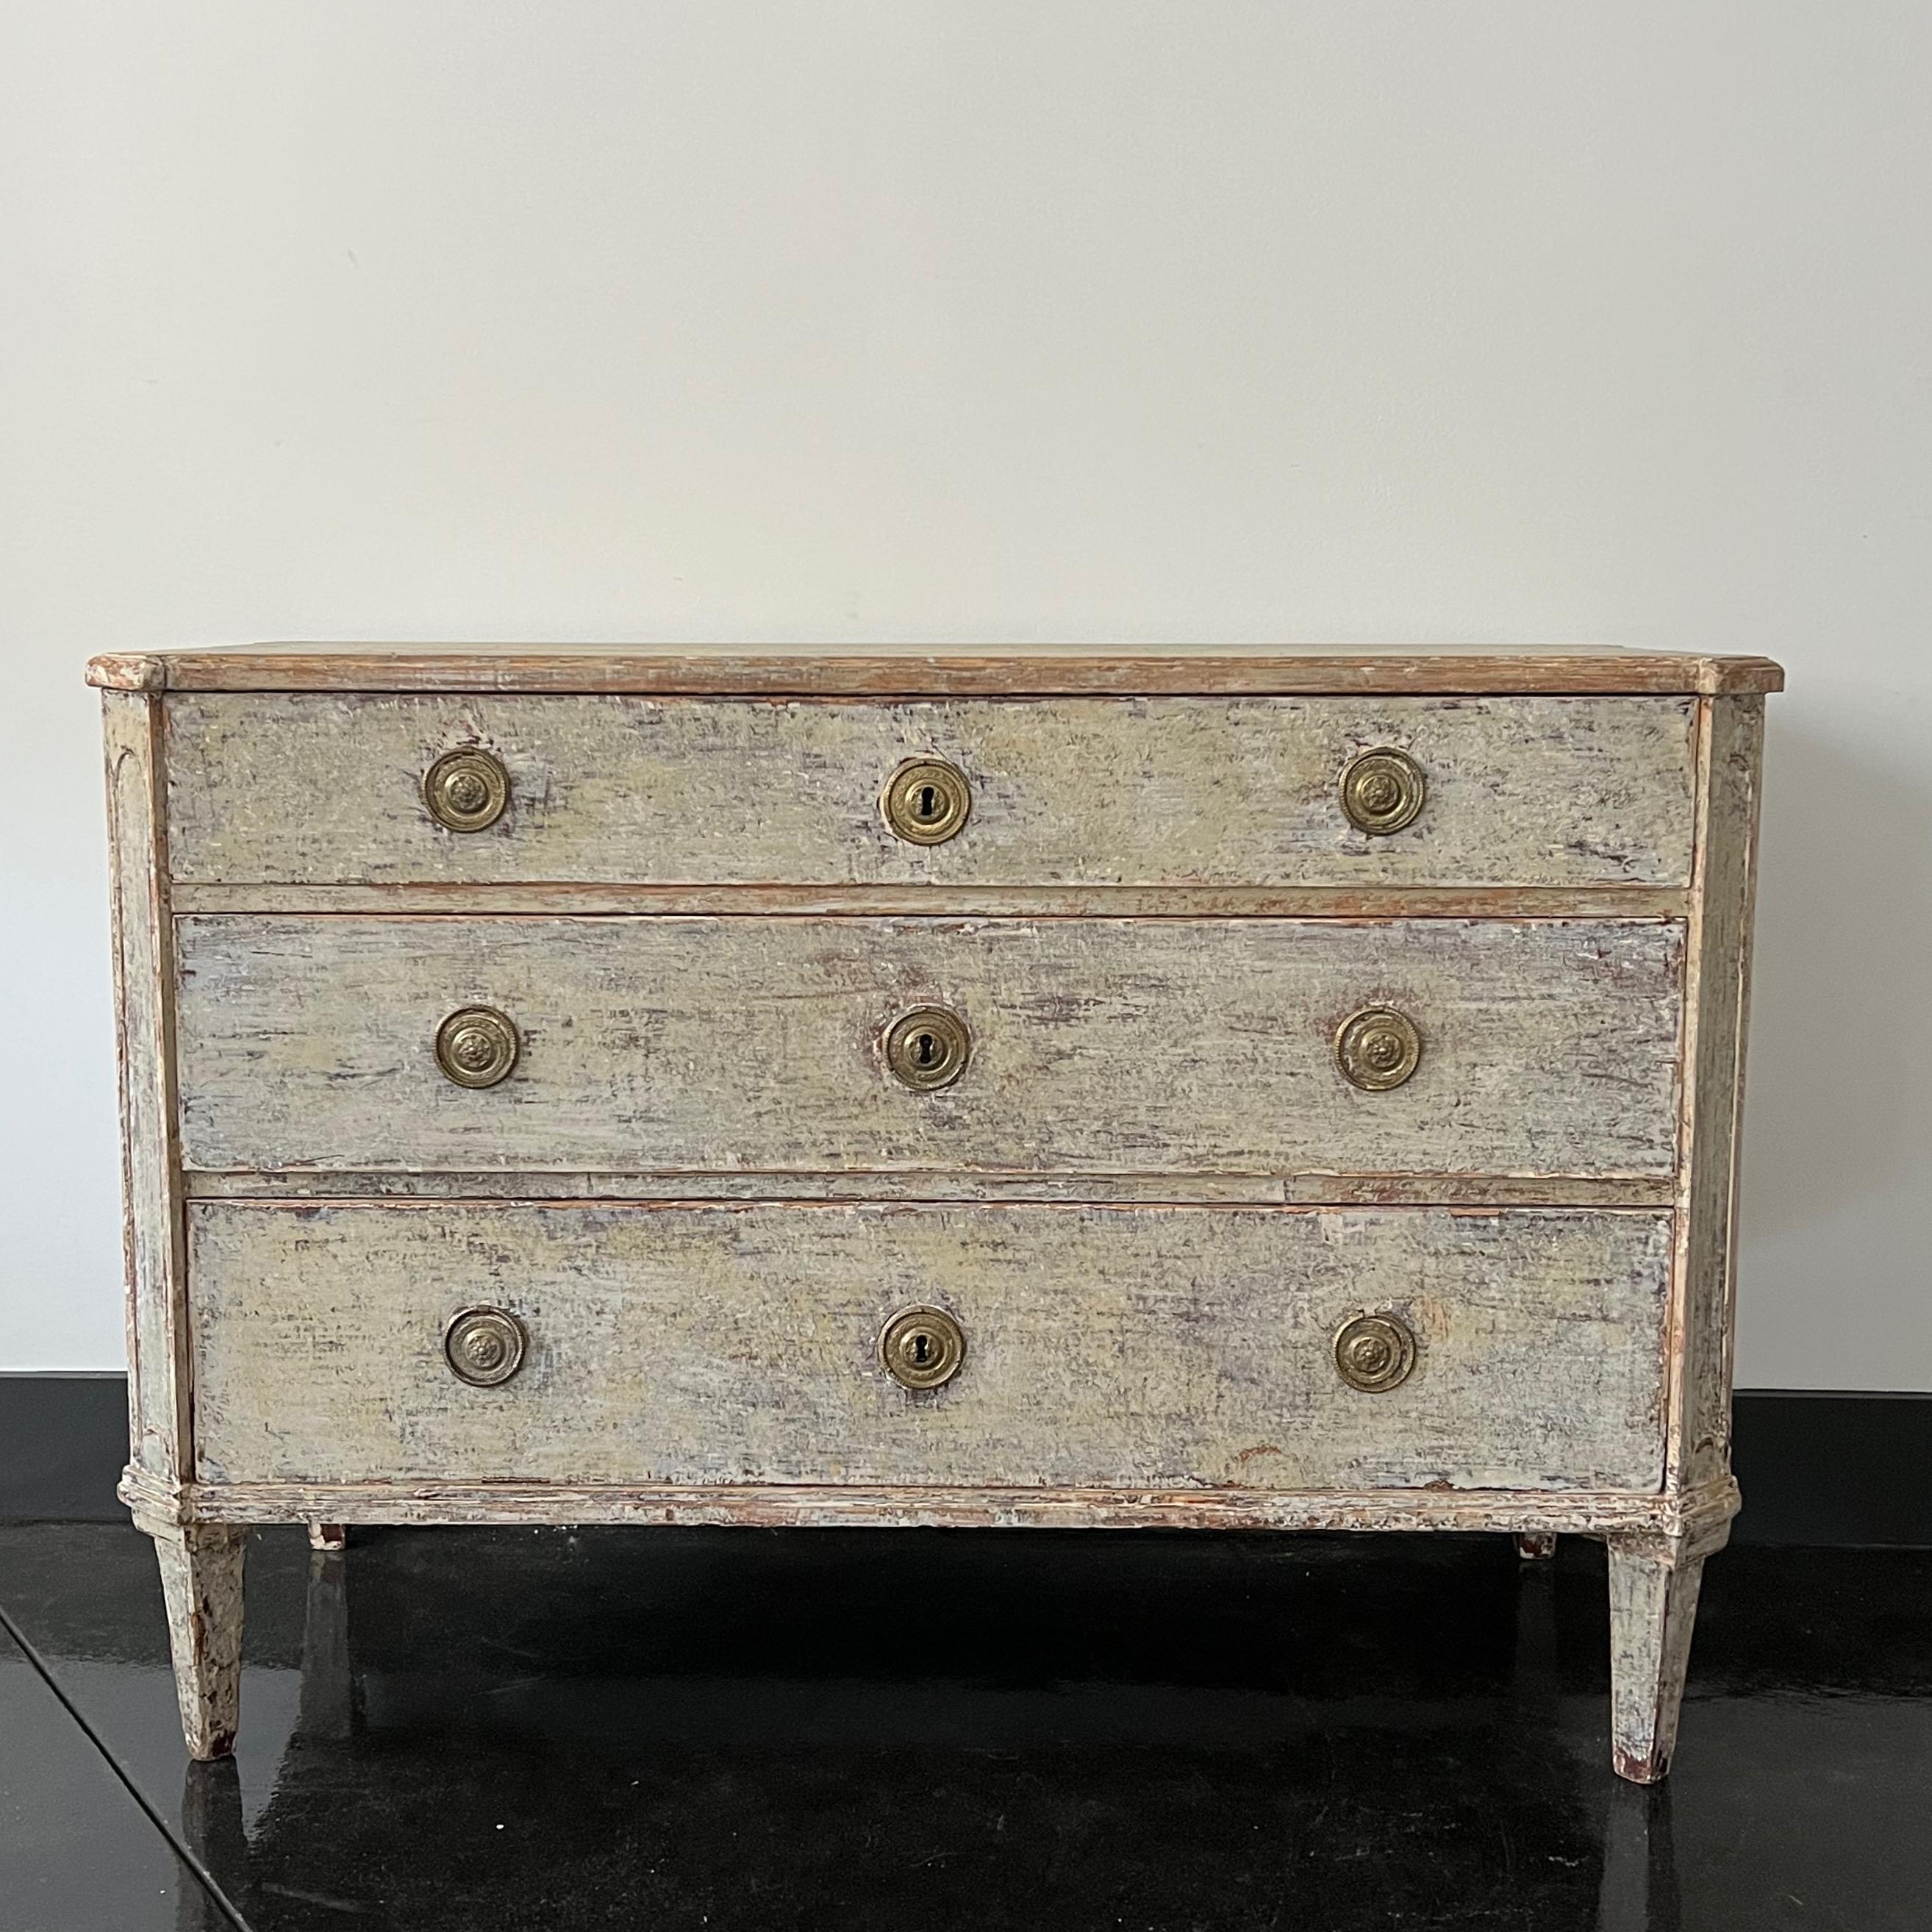 A handsome Swedish Gustavian period chest of drawers with original hardware and original wonderful worn patina.
Stockholm, Sweden, 1790-1800
Here are few examples, surprising pieces and objects, authentic, decorative and rare items that you will